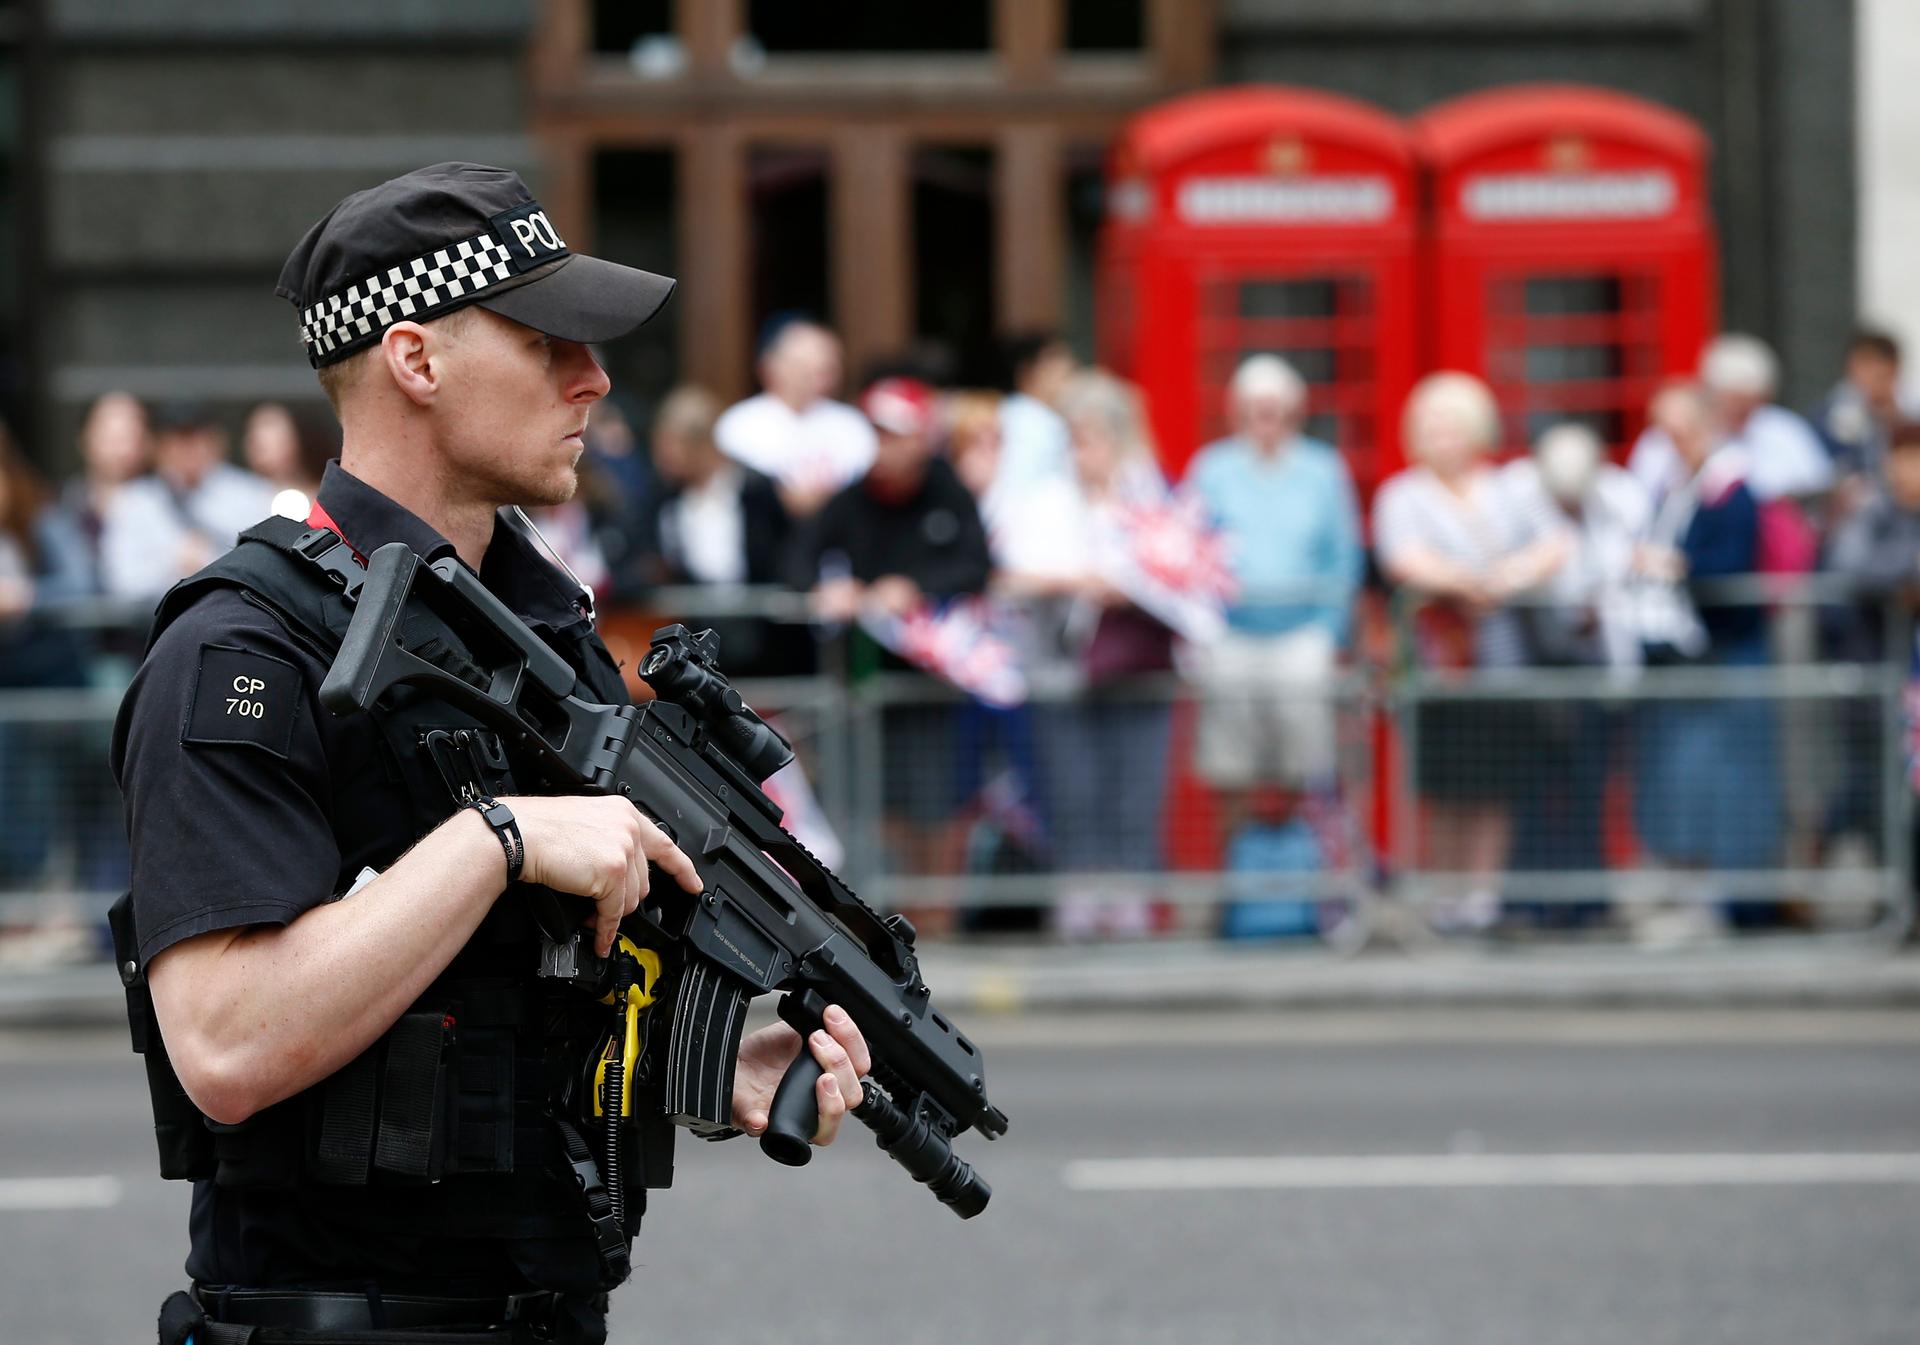 An armed police officer patrols ahead of the arrival of members of Britain's royal family to a service of thanksgiving for Queen Elizabeth's 90th birthday at St Paul's cathedral in London, Britain, June 10, 2016.